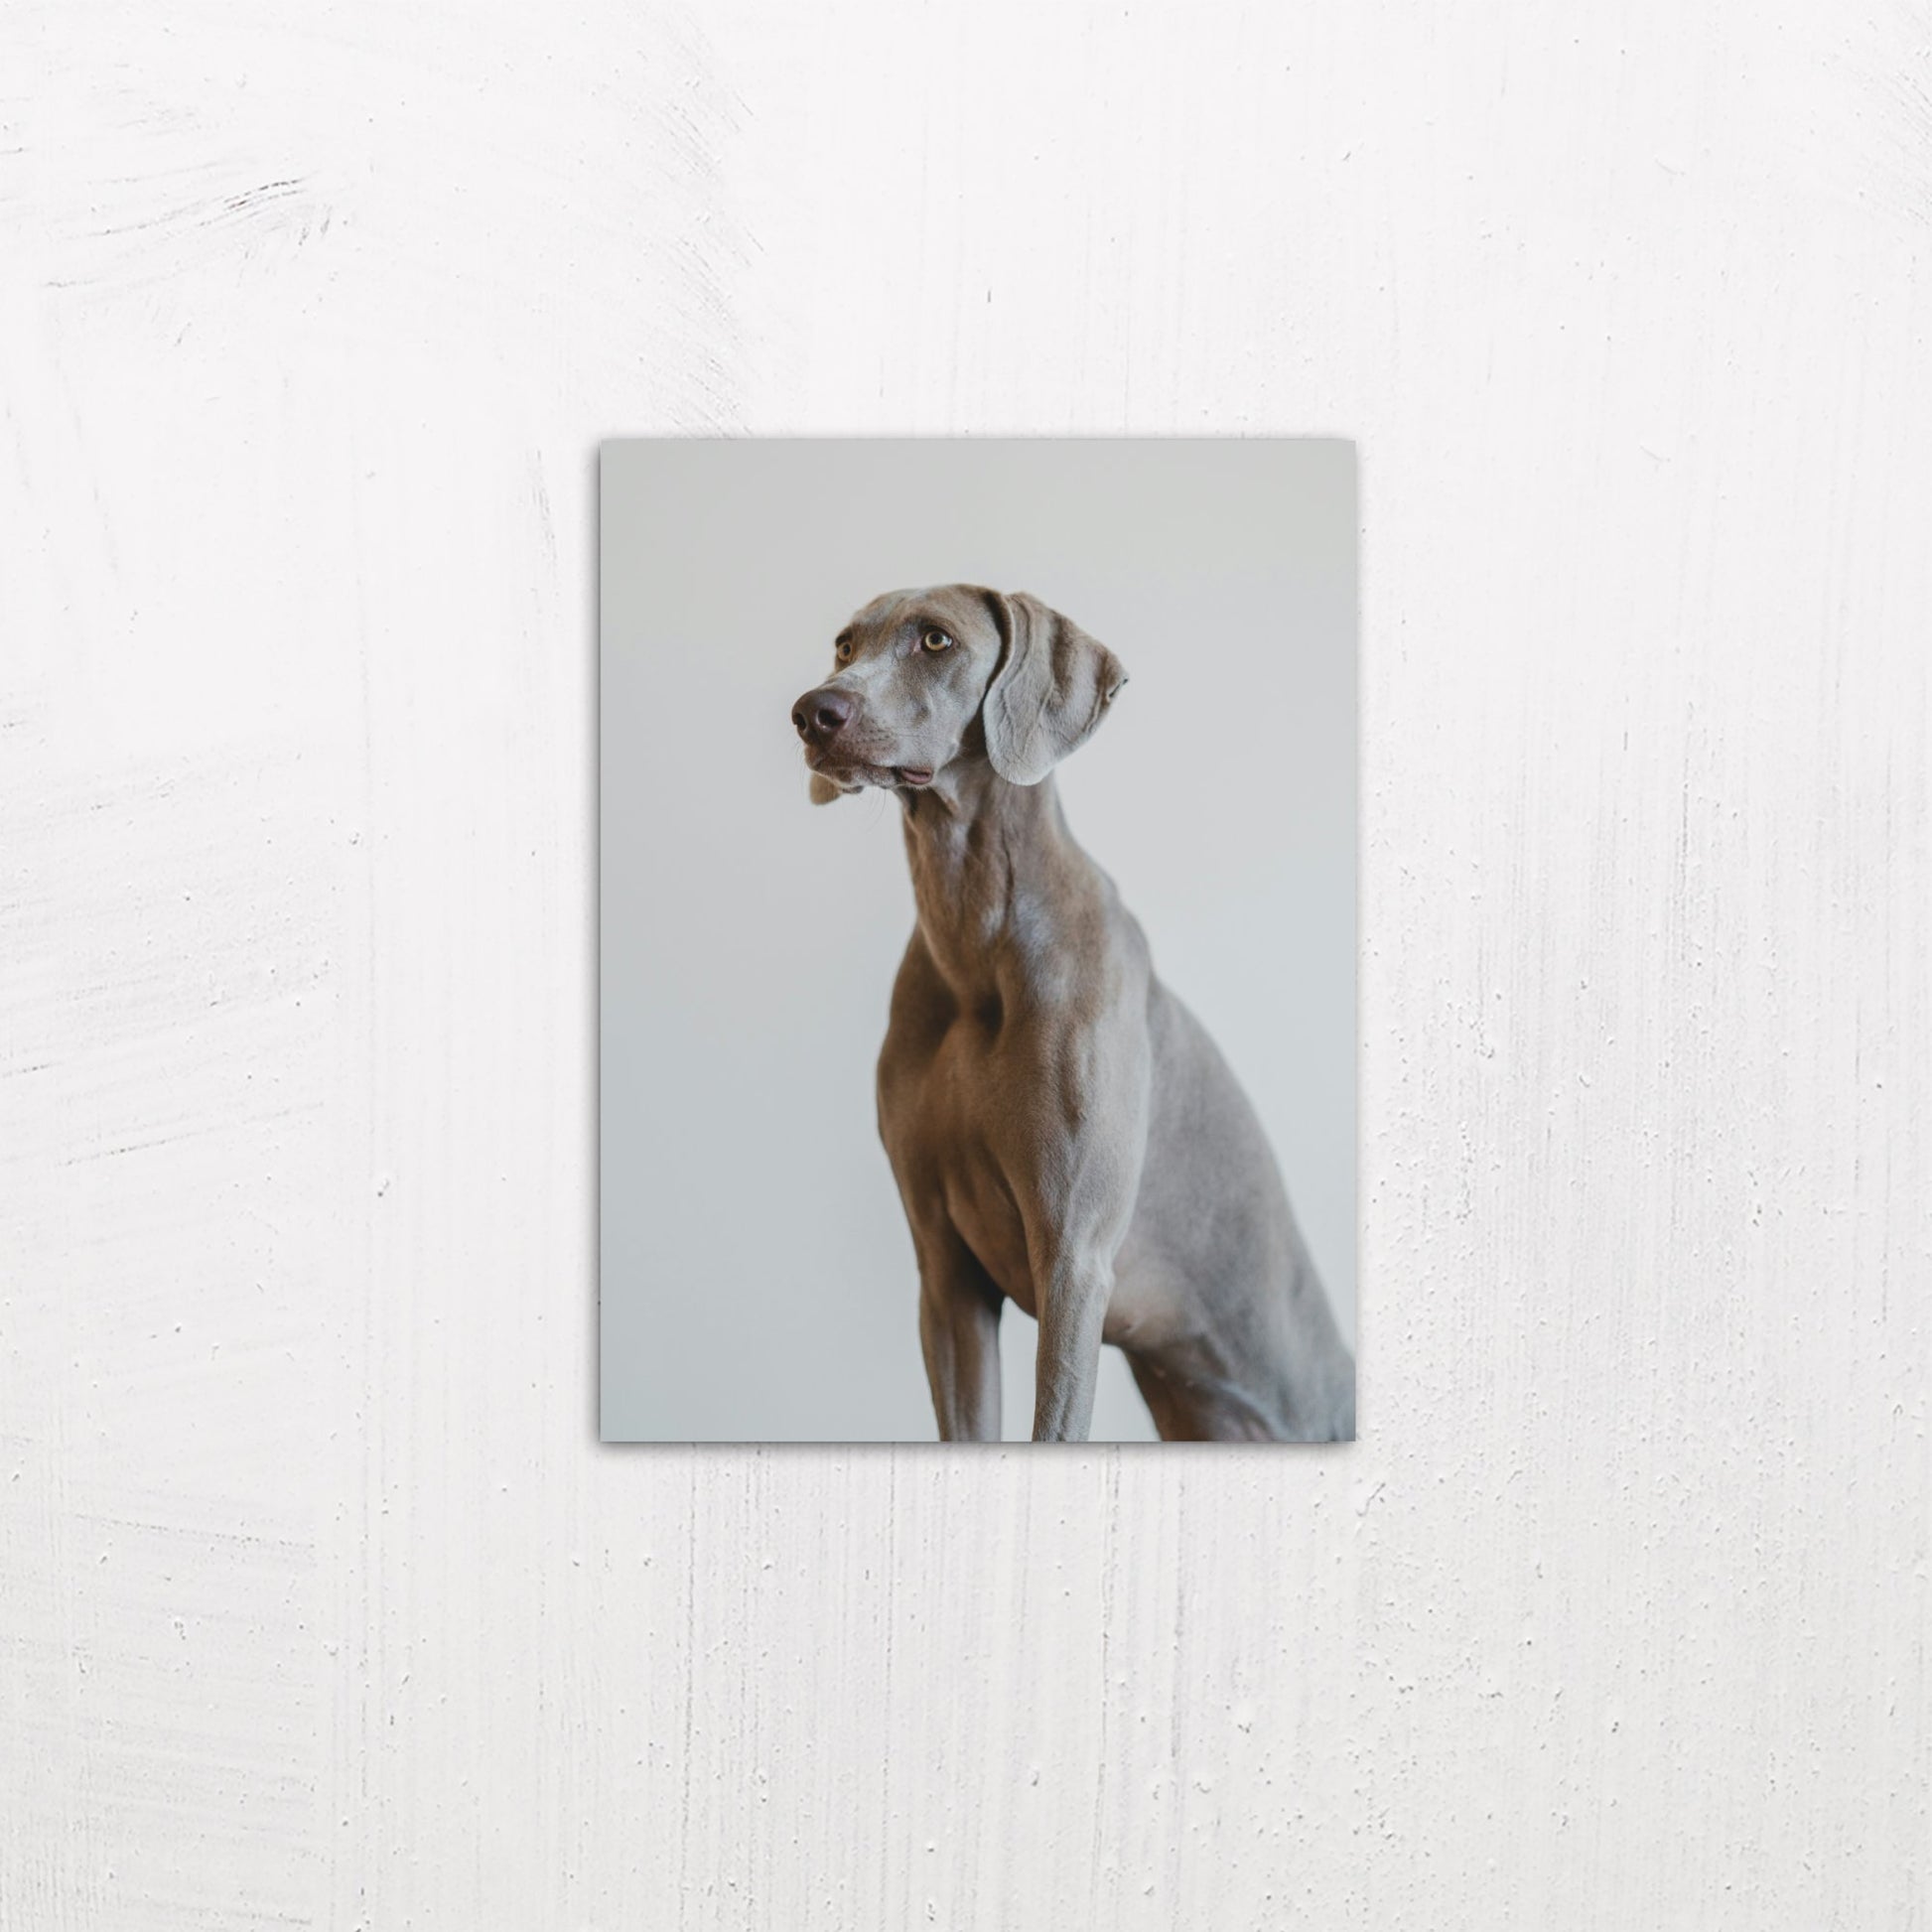 A small size metal art poster display plate with printed design of a Weimaraner